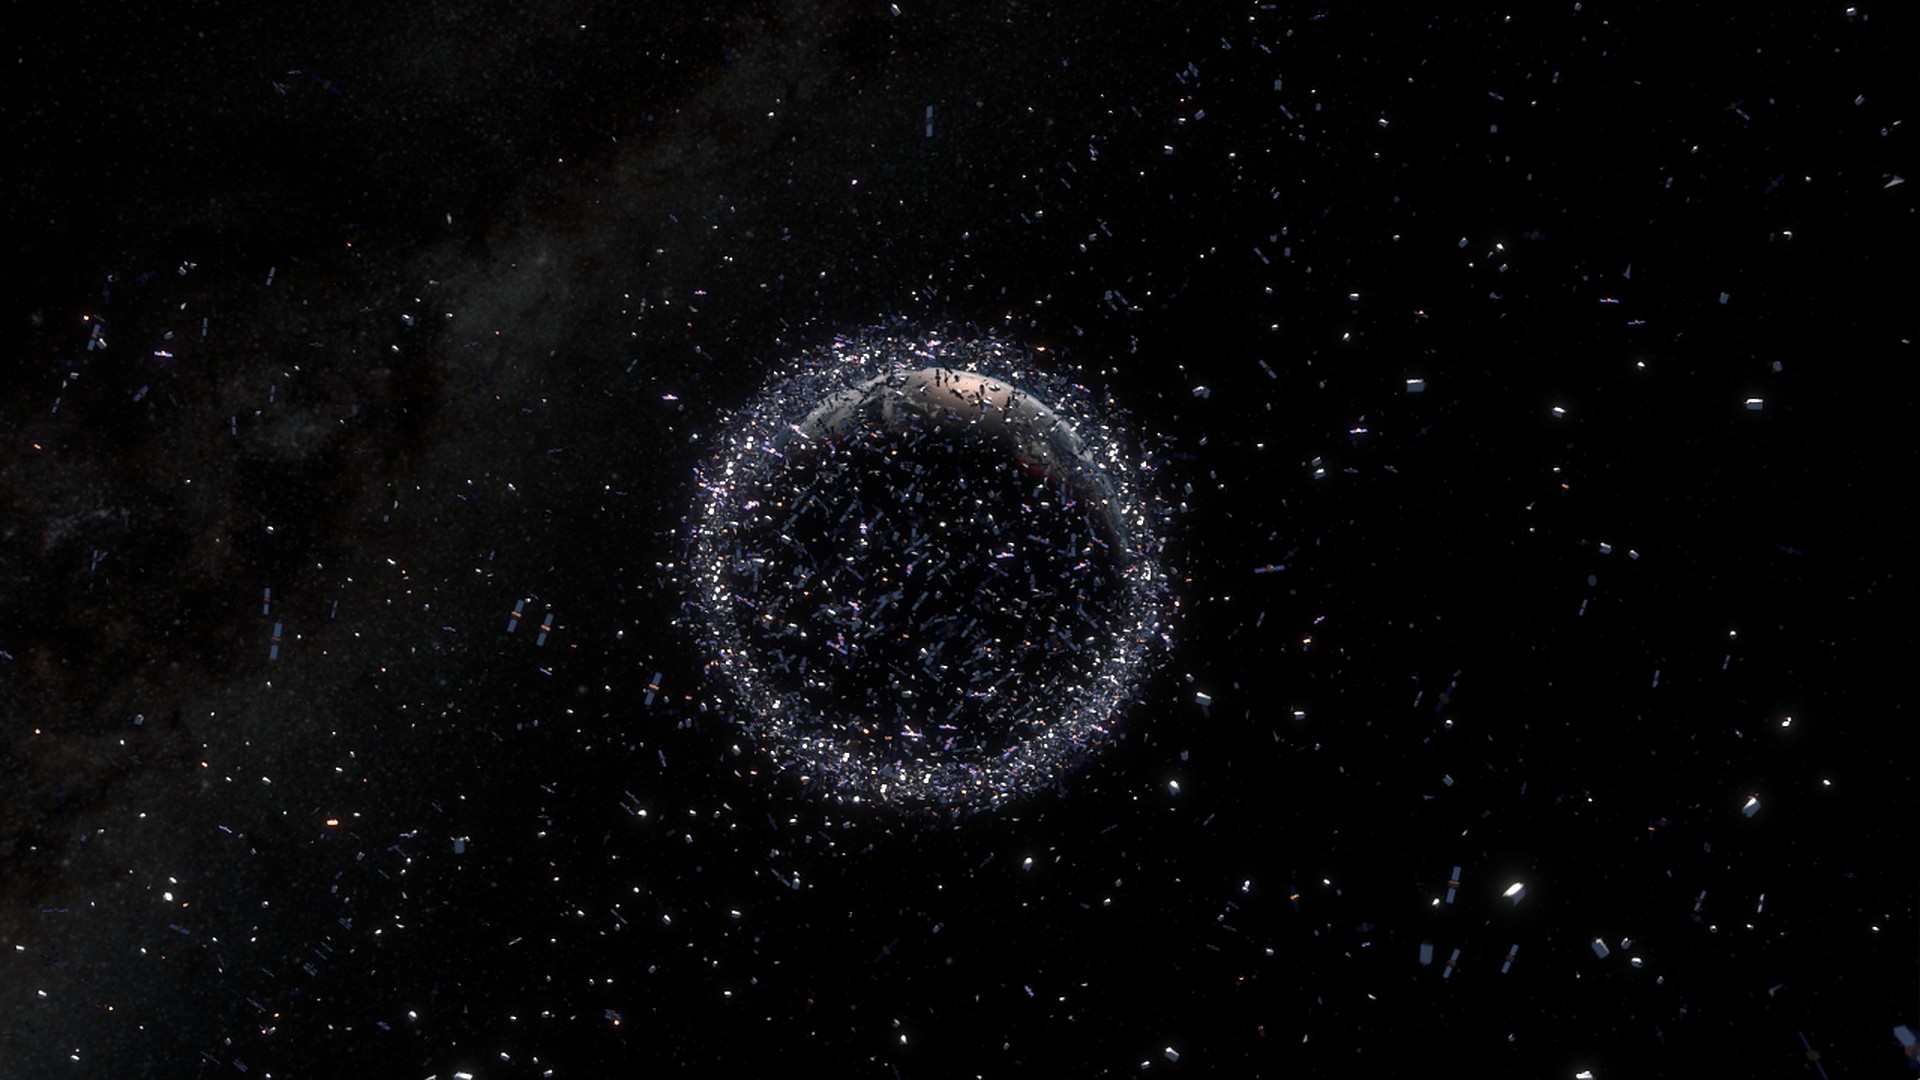 Zero Debris Charter aims to boost international cooperation on cleaning up Earth’s space junk problem Space